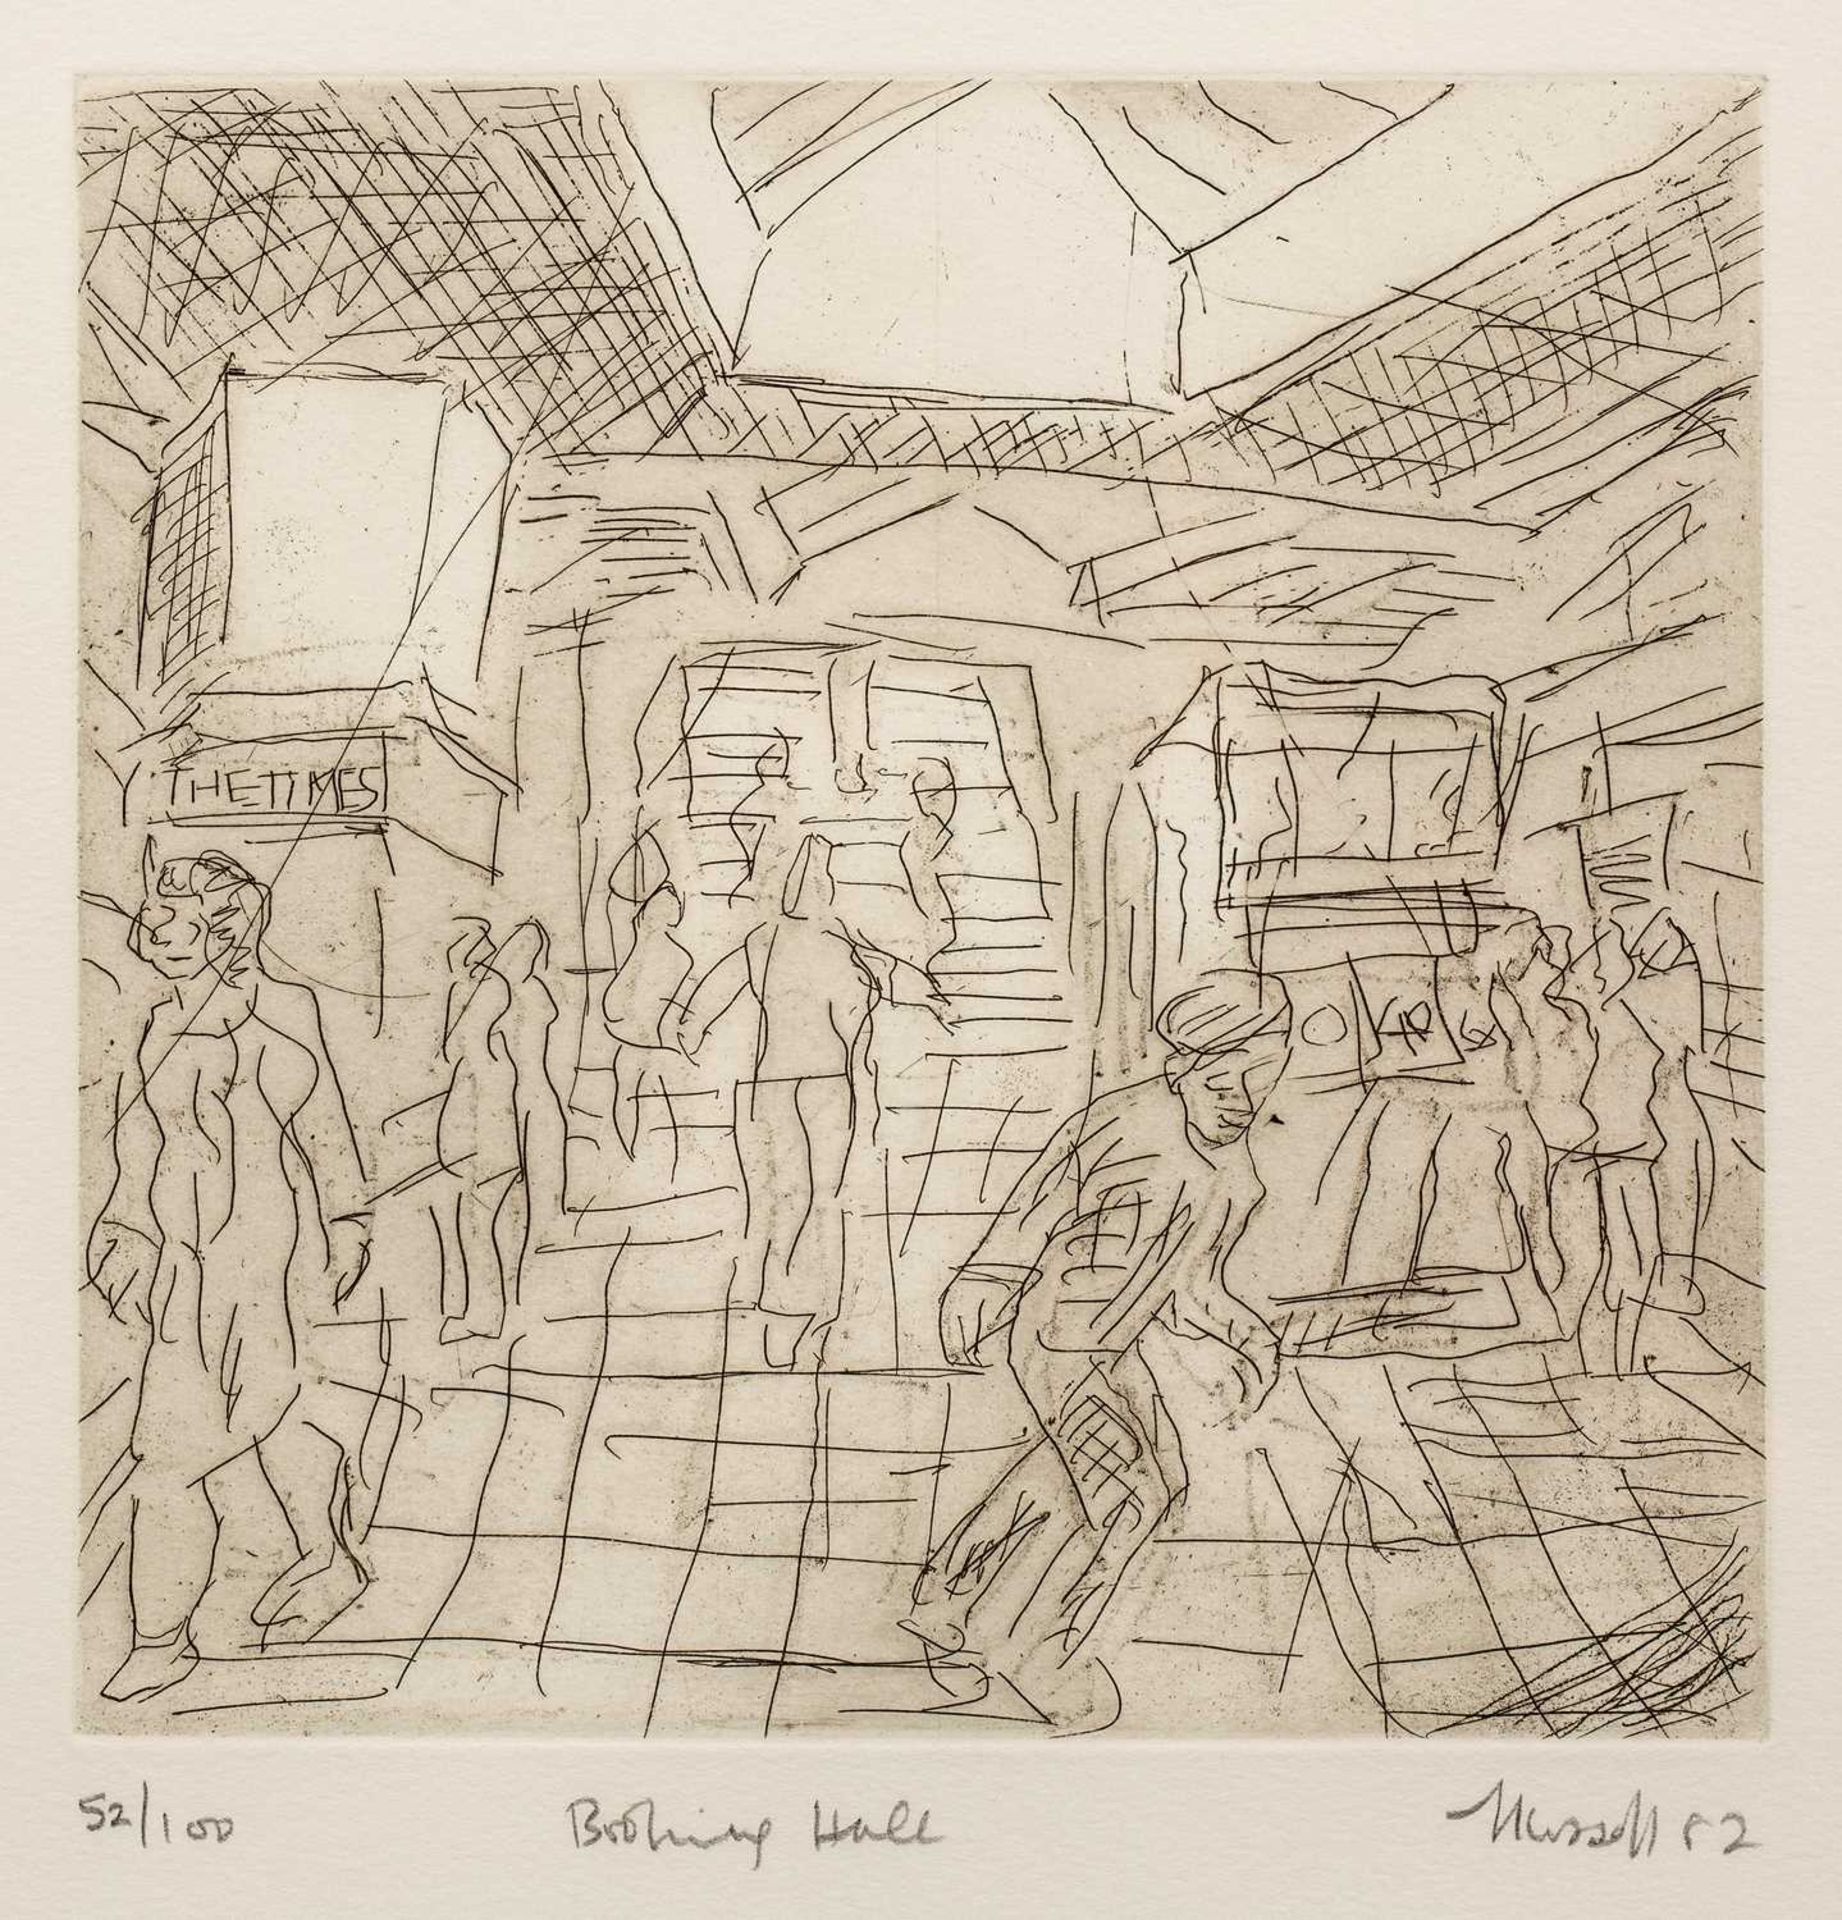 Leon Kosoff (1926-2019) The Booking Hall, 1982 52/100, signed, titled, dated, and numbered in pencil